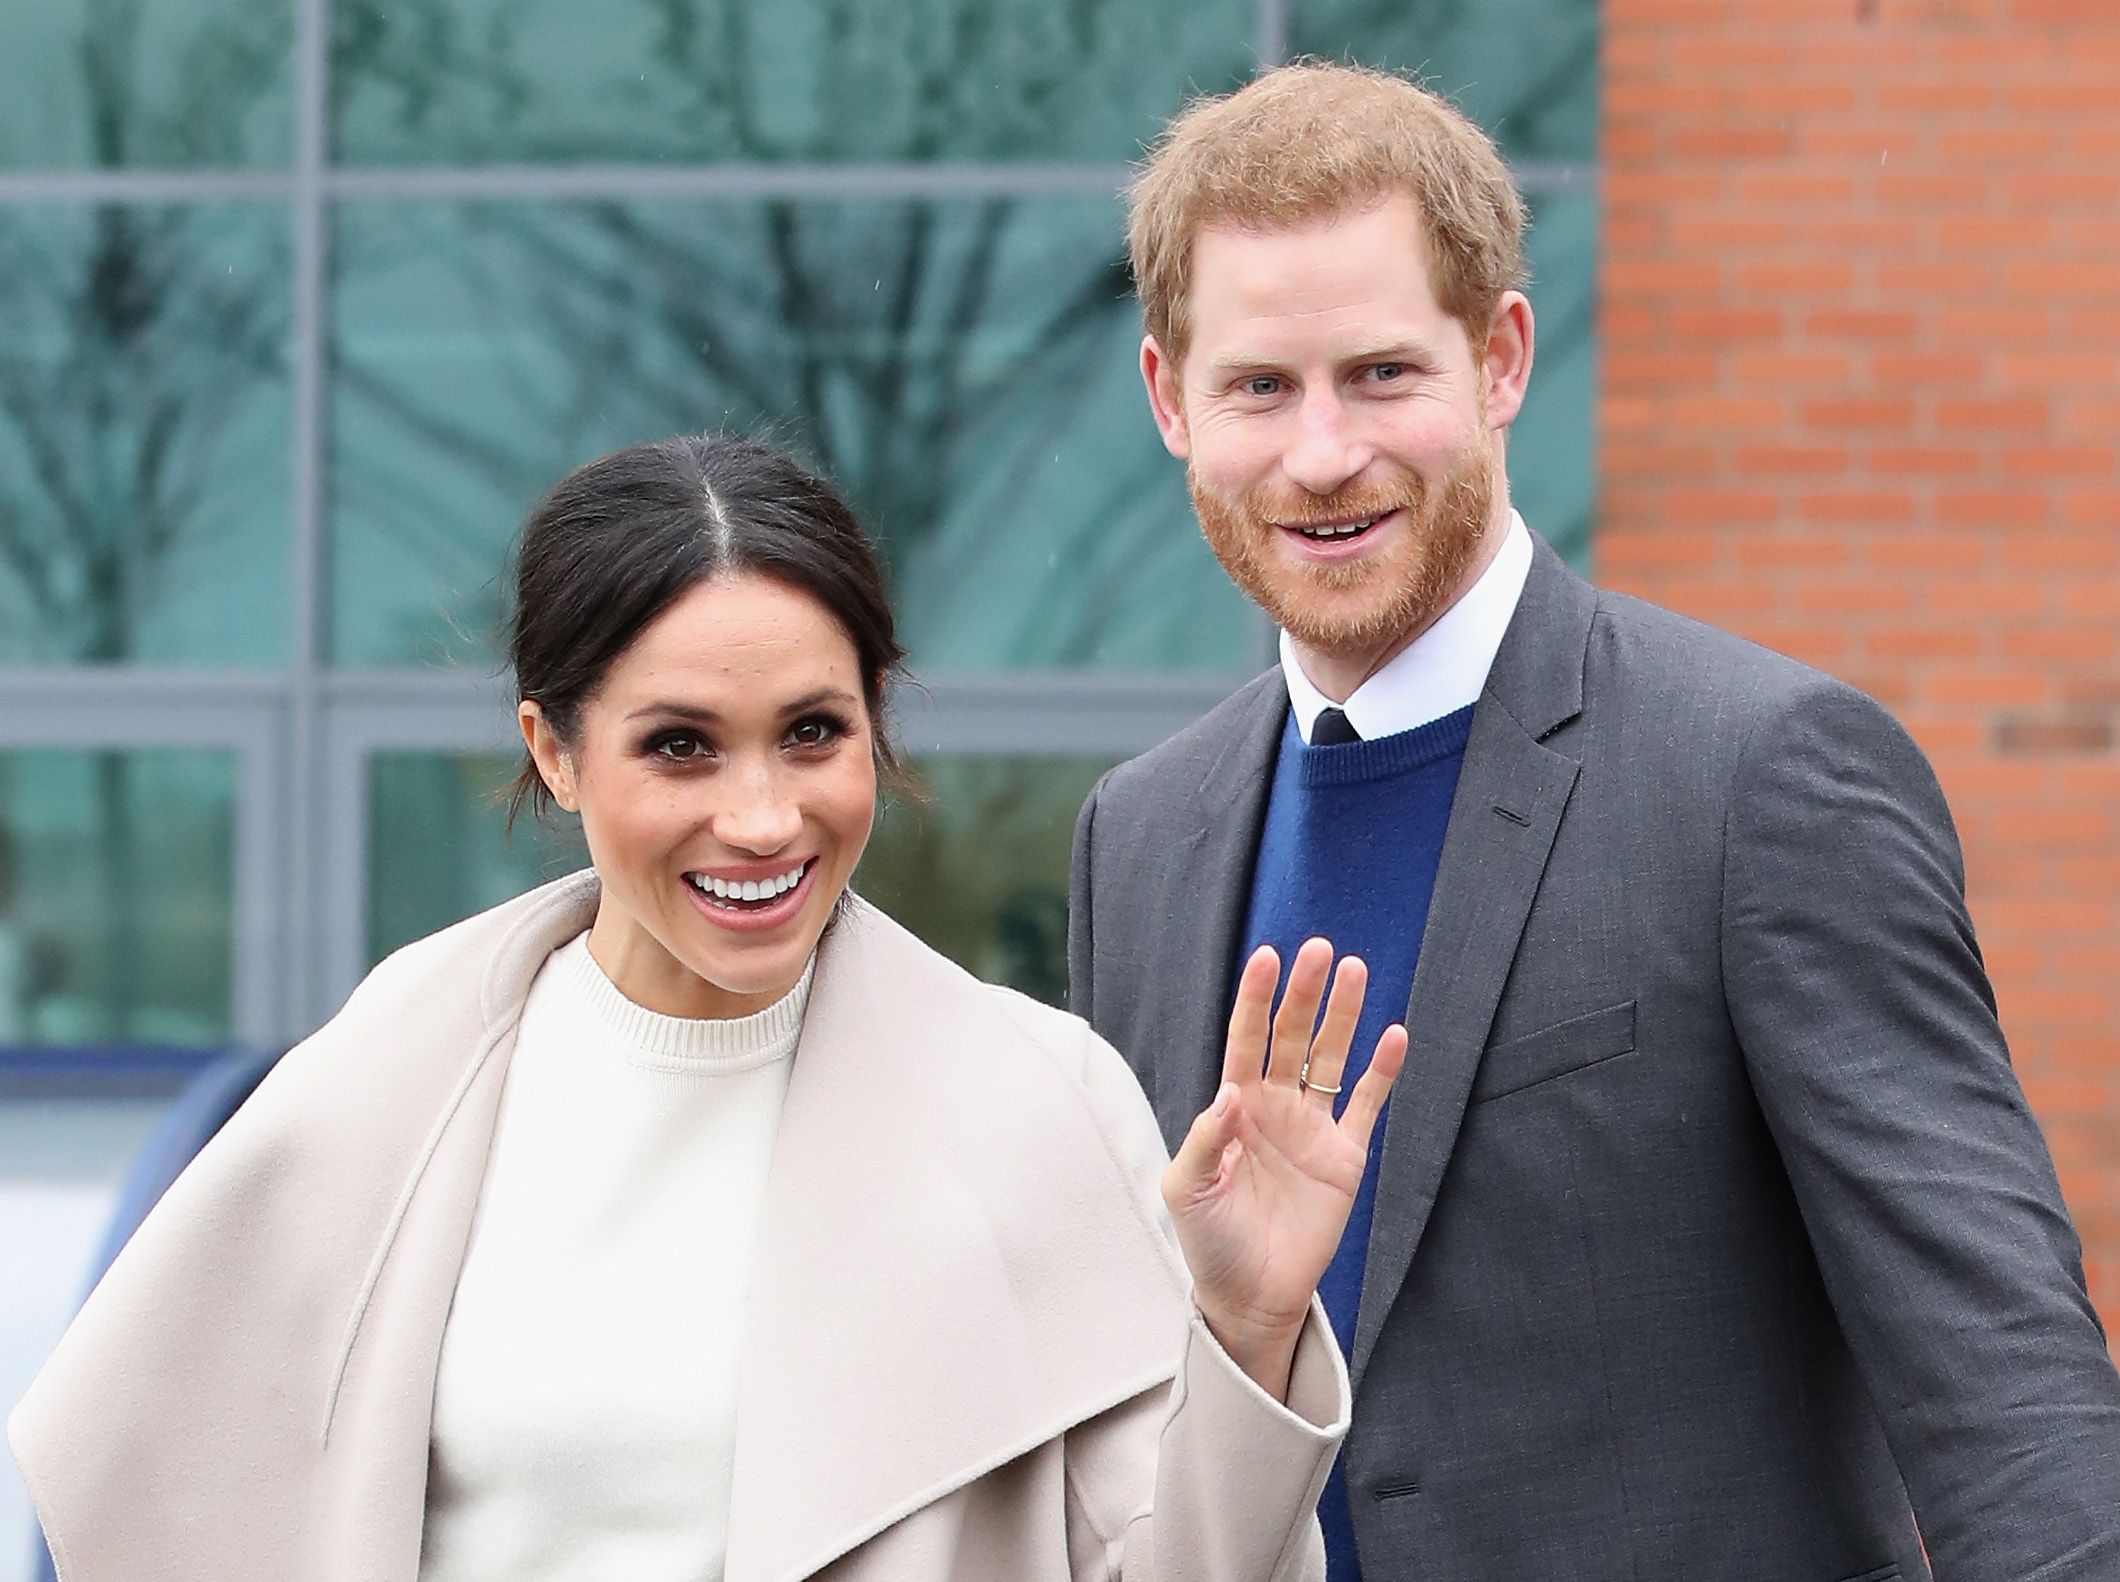 Meghan Markle and Prince Harry depart from Catalyst Inc. on March 23, 2018, in Belfast, Northern Ireland | Photo: Getty Images